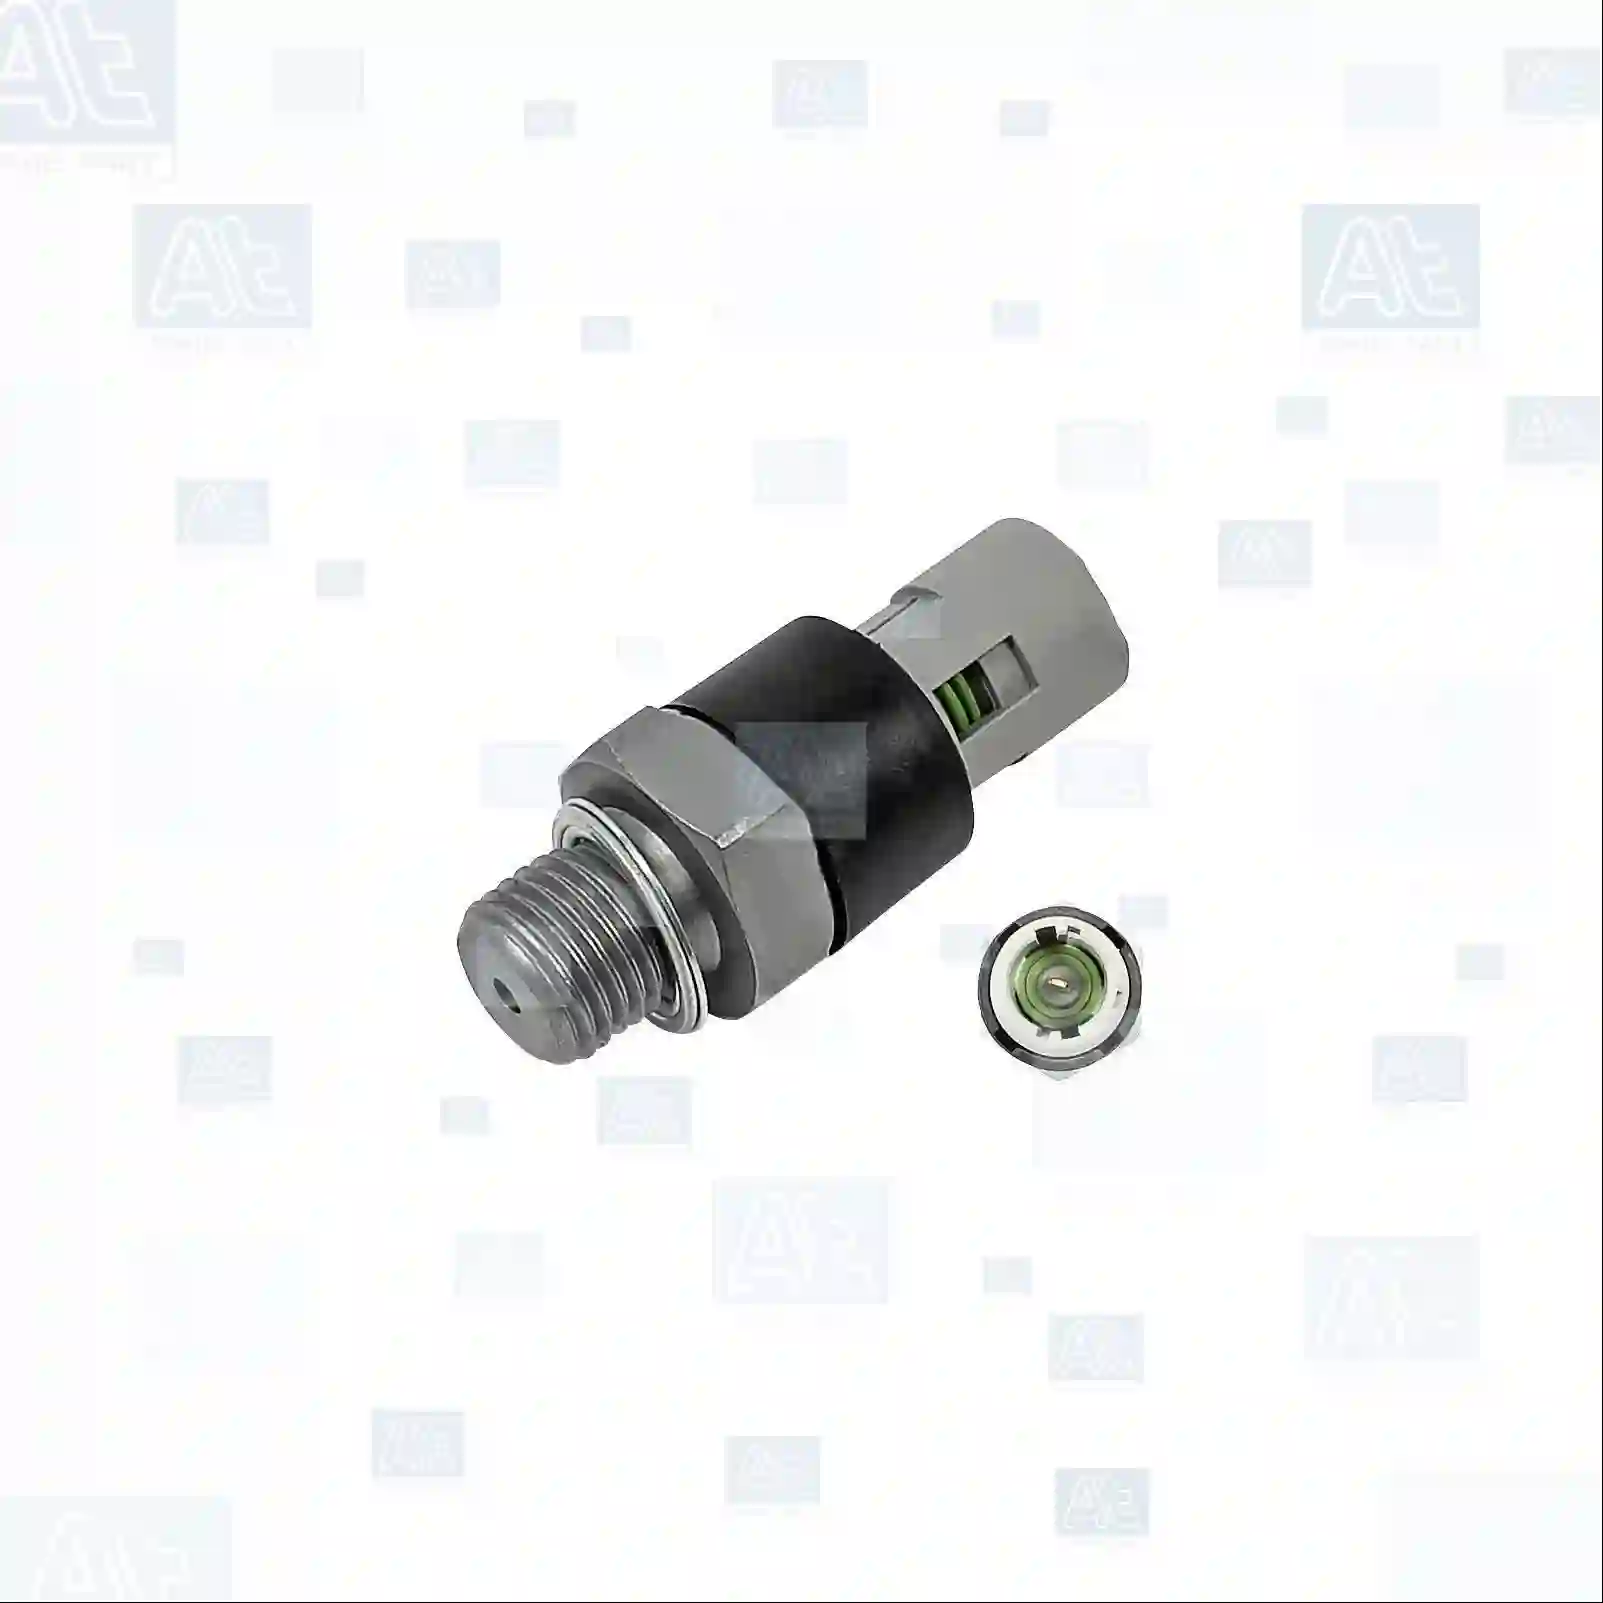 Oil pressure switch, at no 77700324, oem no: 8200026650, 8200670483, 8200671279, 8200970441, 93160284, 93198196, 2263000Q1D, 2263000QAE, 2524000QAB, 25240AW300, 22630-00Q1D, 22630-00QAE, 25240-00Q0B, 25240-00QAB, 25240-AW300, 82000-26650, 4410676, 4433880, 8200026650, 8200670483, 8200671279, 8200970441, 37820-84A00, 37820-84A00-000, 37820-84A01, 37820-84A01-000, 9128771, 91287714 At Spare Part | Engine, Accelerator Pedal, Camshaft, Connecting Rod, Crankcase, Crankshaft, Cylinder Head, Engine Suspension Mountings, Exhaust Manifold, Exhaust Gas Recirculation, Filter Kits, Flywheel Housing, General Overhaul Kits, Engine, Intake Manifold, Oil Cleaner, Oil Cooler, Oil Filter, Oil Pump, Oil Sump, Piston & Liner, Sensor & Switch, Timing Case, Turbocharger, Cooling System, Belt Tensioner, Coolant Filter, Coolant Pipe, Corrosion Prevention Agent, Drive, Expansion Tank, Fan, Intercooler, Monitors & Gauges, Radiator, Thermostat, V-Belt / Timing belt, Water Pump, Fuel System, Electronical Injector Unit, Feed Pump, Fuel Filter, cpl., Fuel Gauge Sender,  Fuel Line, Fuel Pump, Fuel Tank, Injection Line Kit, Injection Pump, Exhaust System, Clutch & Pedal, Gearbox, Propeller Shaft, Axles, Brake System, Hubs & Wheels, Suspension, Leaf Spring, Universal Parts / Accessories, Steering, Electrical System, Cabin Oil pressure switch, at no 77700324, oem no: 8200026650, 8200670483, 8200671279, 8200970441, 93160284, 93198196, 2263000Q1D, 2263000QAE, 2524000QAB, 25240AW300, 22630-00Q1D, 22630-00QAE, 25240-00Q0B, 25240-00QAB, 25240-AW300, 82000-26650, 4410676, 4433880, 8200026650, 8200670483, 8200671279, 8200970441, 37820-84A00, 37820-84A00-000, 37820-84A01, 37820-84A01-000, 9128771, 91287714 At Spare Part | Engine, Accelerator Pedal, Camshaft, Connecting Rod, Crankcase, Crankshaft, Cylinder Head, Engine Suspension Mountings, Exhaust Manifold, Exhaust Gas Recirculation, Filter Kits, Flywheel Housing, General Overhaul Kits, Engine, Intake Manifold, Oil Cleaner, Oil Cooler, Oil Filter, Oil Pump, Oil Sump, Piston & Liner, Sensor & Switch, Timing Case, Turbocharger, Cooling System, Belt Tensioner, Coolant Filter, Coolant Pipe, Corrosion Prevention Agent, Drive, Expansion Tank, Fan, Intercooler, Monitors & Gauges, Radiator, Thermostat, V-Belt / Timing belt, Water Pump, Fuel System, Electronical Injector Unit, Feed Pump, Fuel Filter, cpl., Fuel Gauge Sender,  Fuel Line, Fuel Pump, Fuel Tank, Injection Line Kit, Injection Pump, Exhaust System, Clutch & Pedal, Gearbox, Propeller Shaft, Axles, Brake System, Hubs & Wheels, Suspension, Leaf Spring, Universal Parts / Accessories, Steering, Electrical System, Cabin